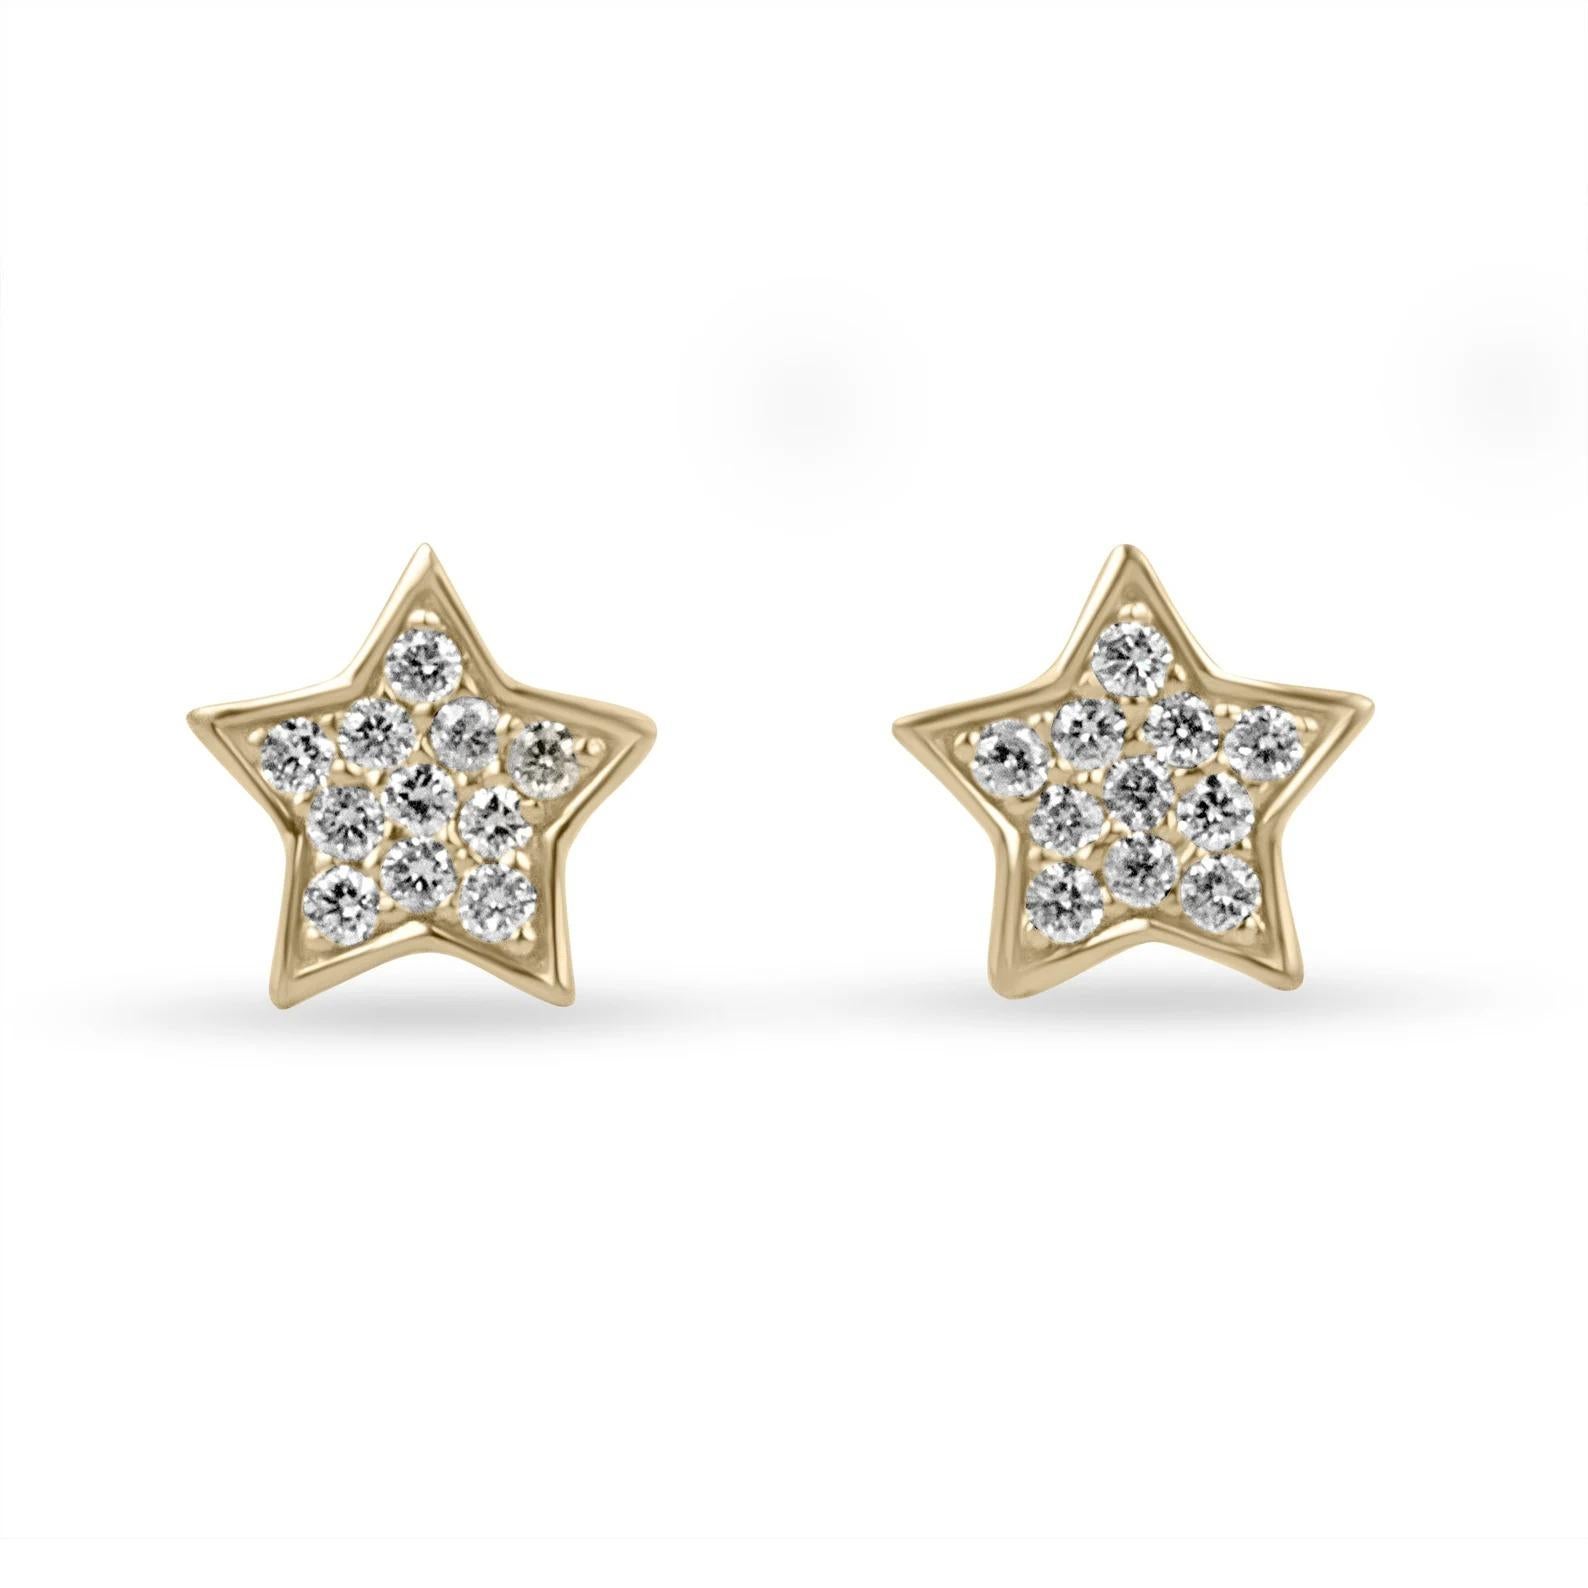 A wonderful and lively pair of natural diamond flat star stud earrings. This petite yet magical pair showcases 0.14-carats total of sparky white brilliant round cut diamonds pave set within. Crafted in 14K gold, in the color of your choice. The